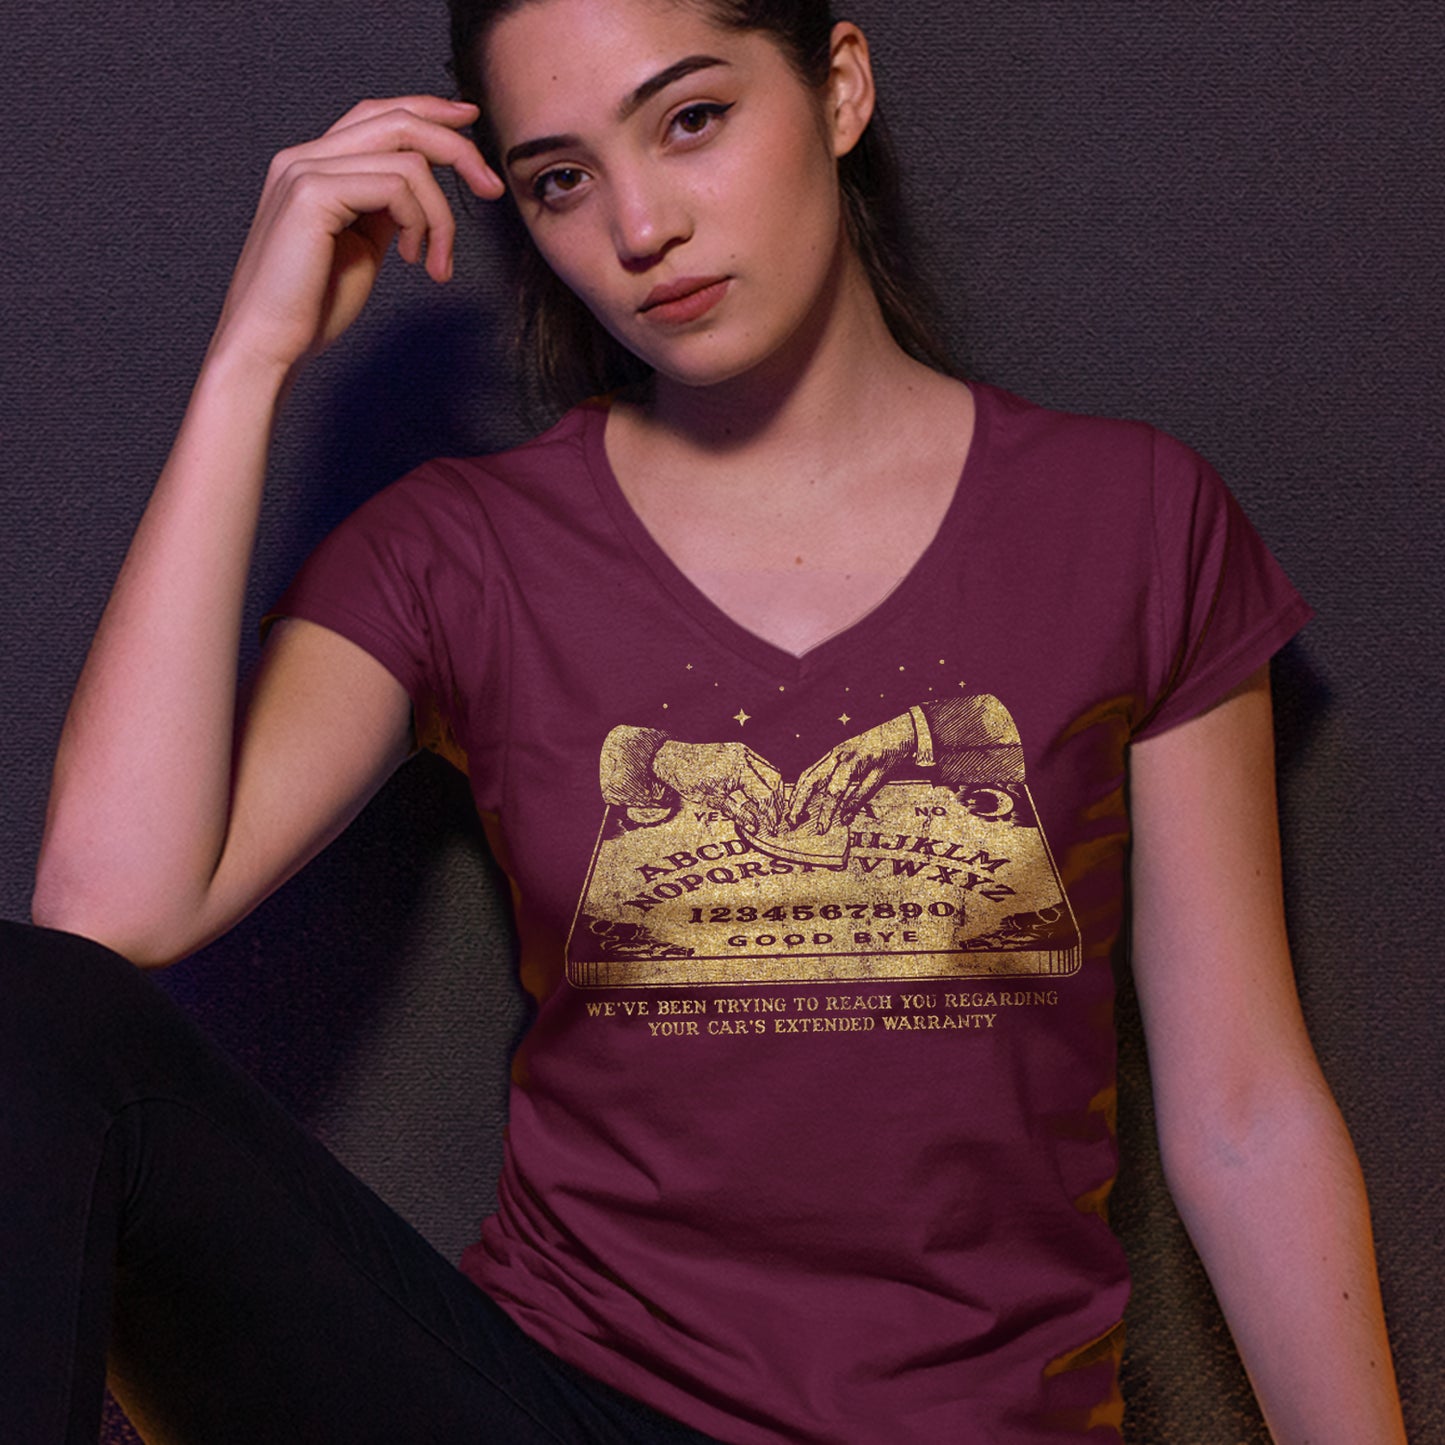 A female model wearing a maroon V-neck shirt, with a gold color image of two hands over a Ouija board. Under the board is gold text saying "We've been trying to reach you regarding your car's extended warranty." Behind the model is a dark purple background.